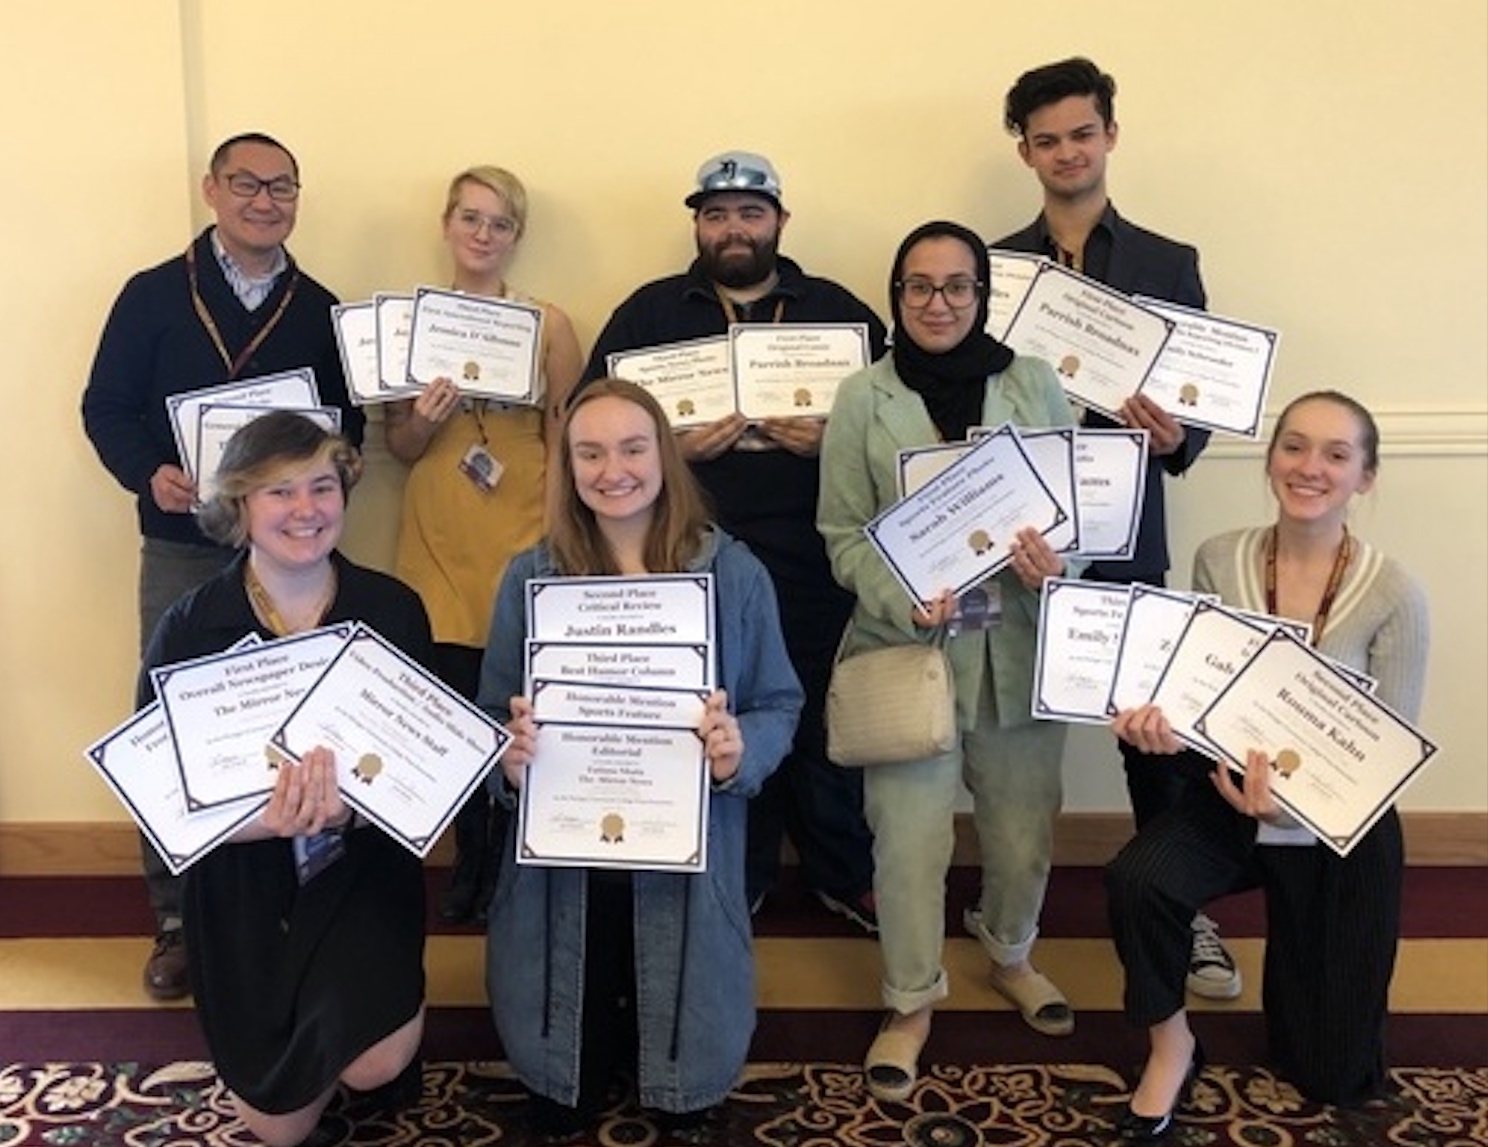 Mirror Newspaper staff holding up awards at 2019 Michigan Community College Press Association conference at Central Michigan University, April 6, 2019